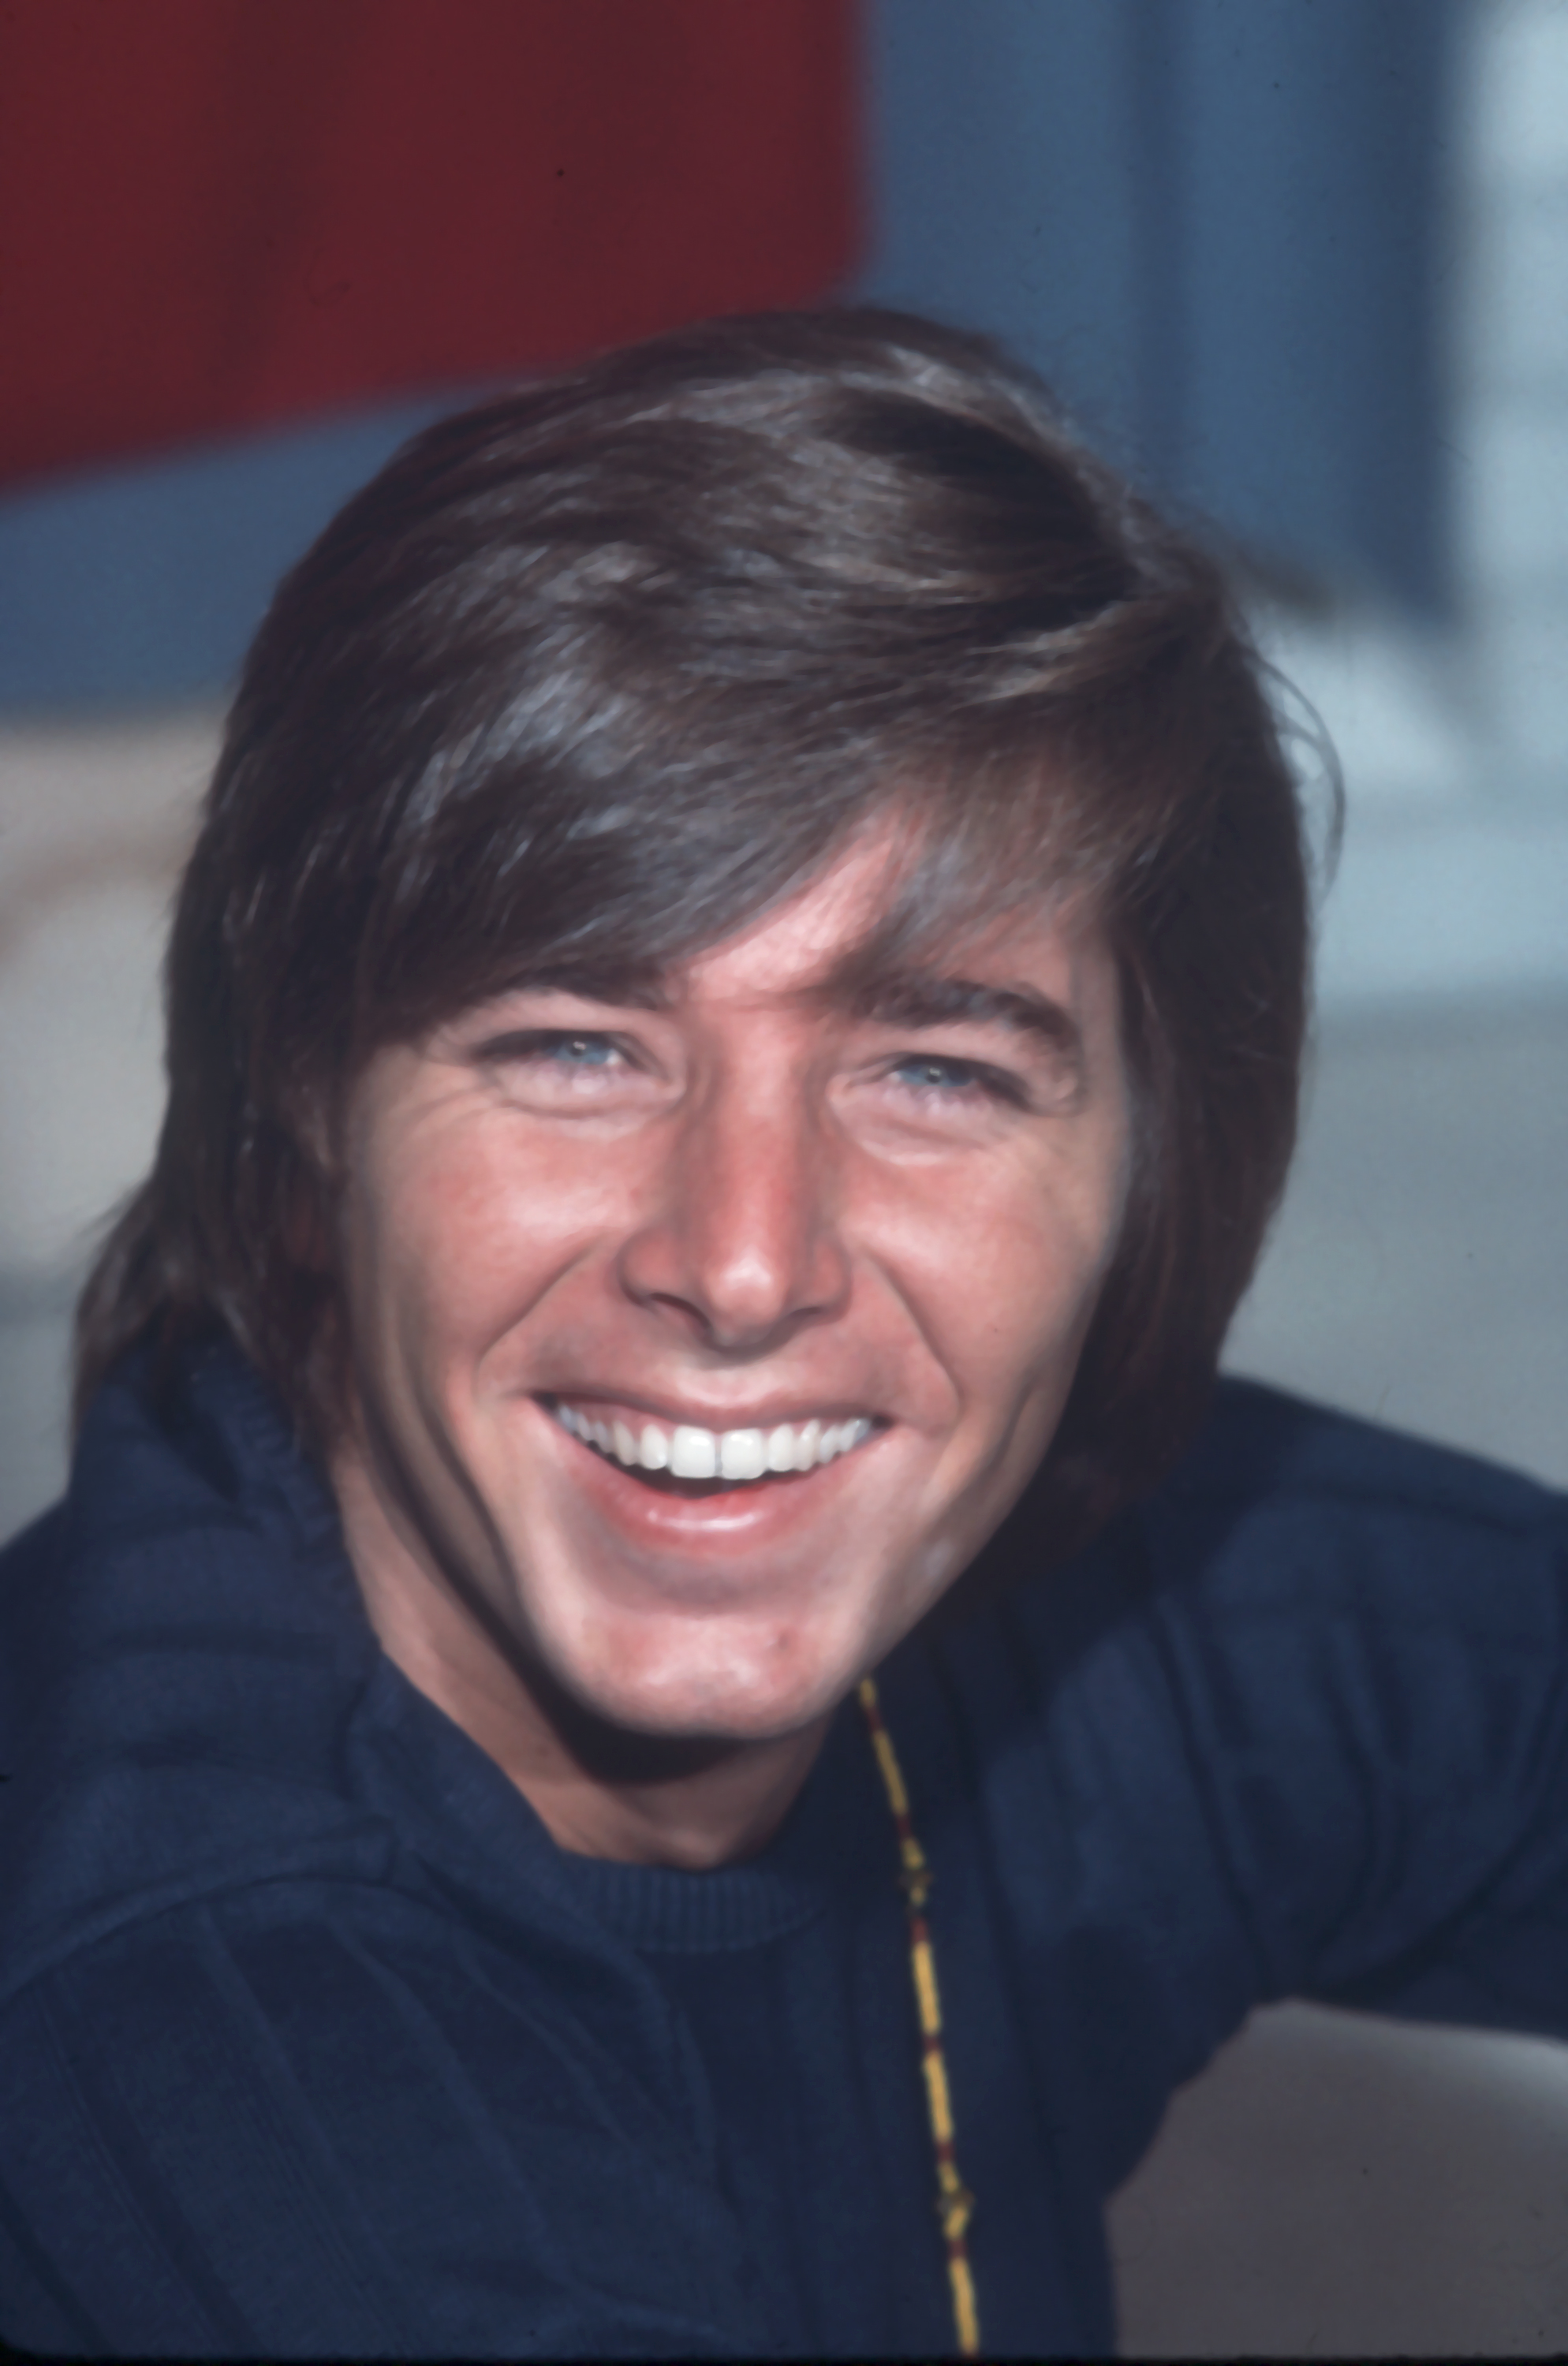 Bobby Sherman photographed in 1970 | Source: Getty Images